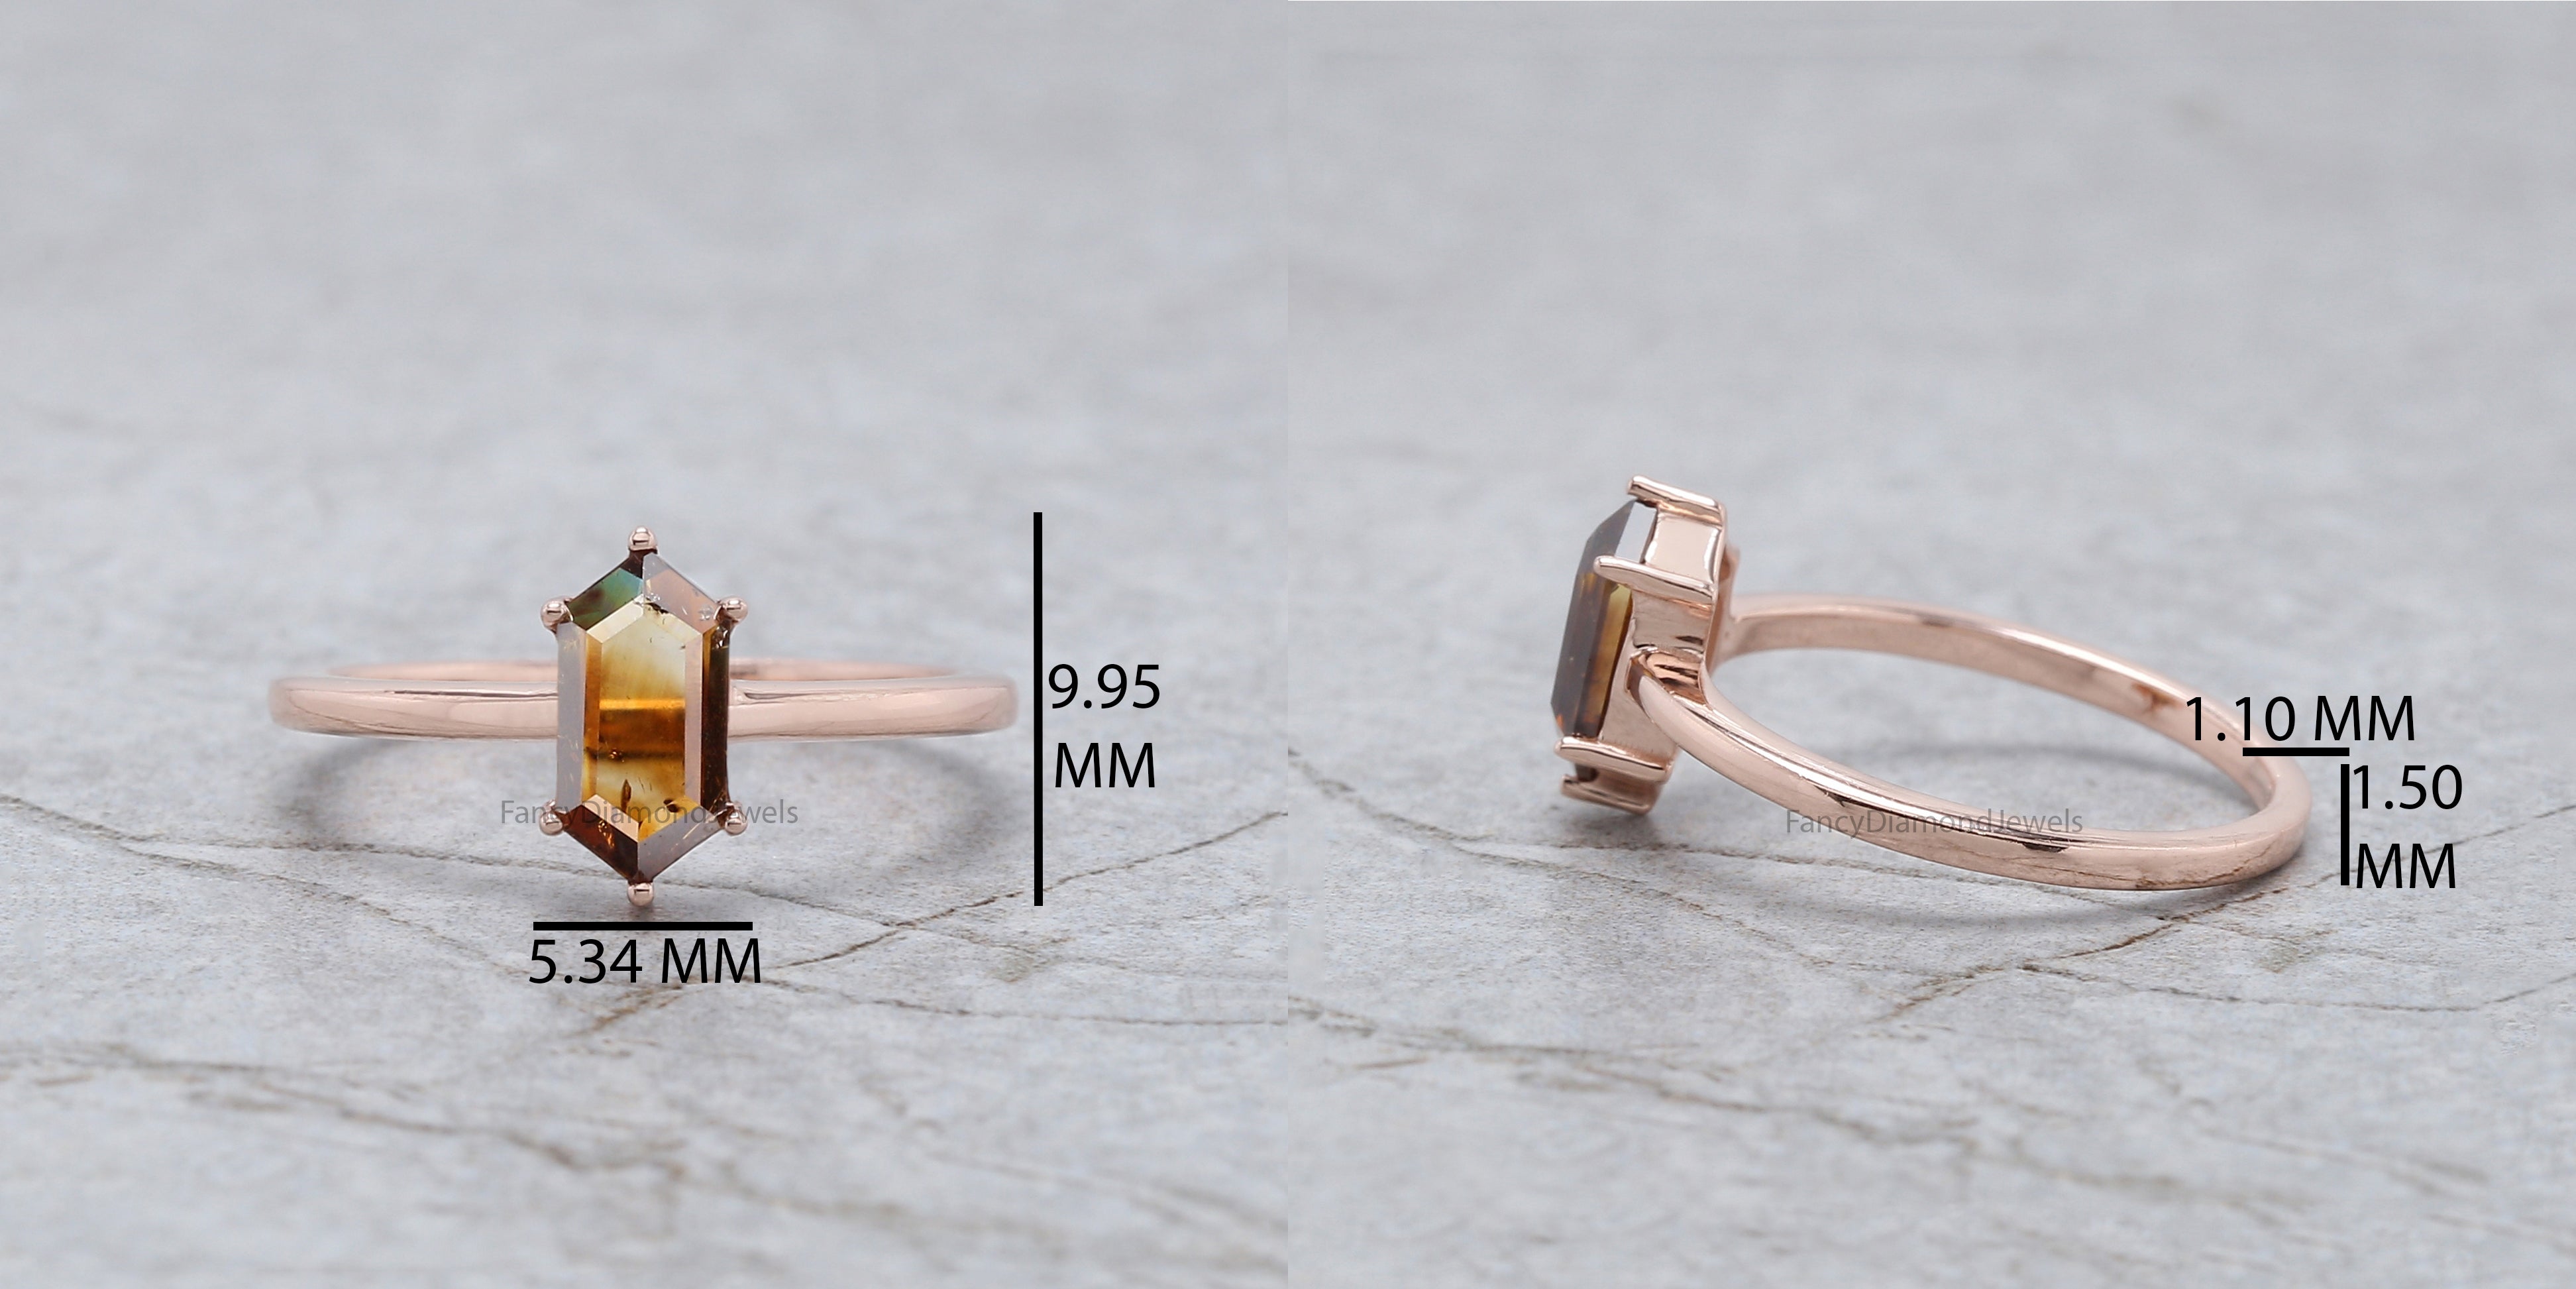 Hexagon Brown Color Diamond Ring 0.93 Ct 8.80 MM Hexagon Shape Diamond Ring 14K Solid Rose Gold Silver Engagement Ring Gift For Her QL1657